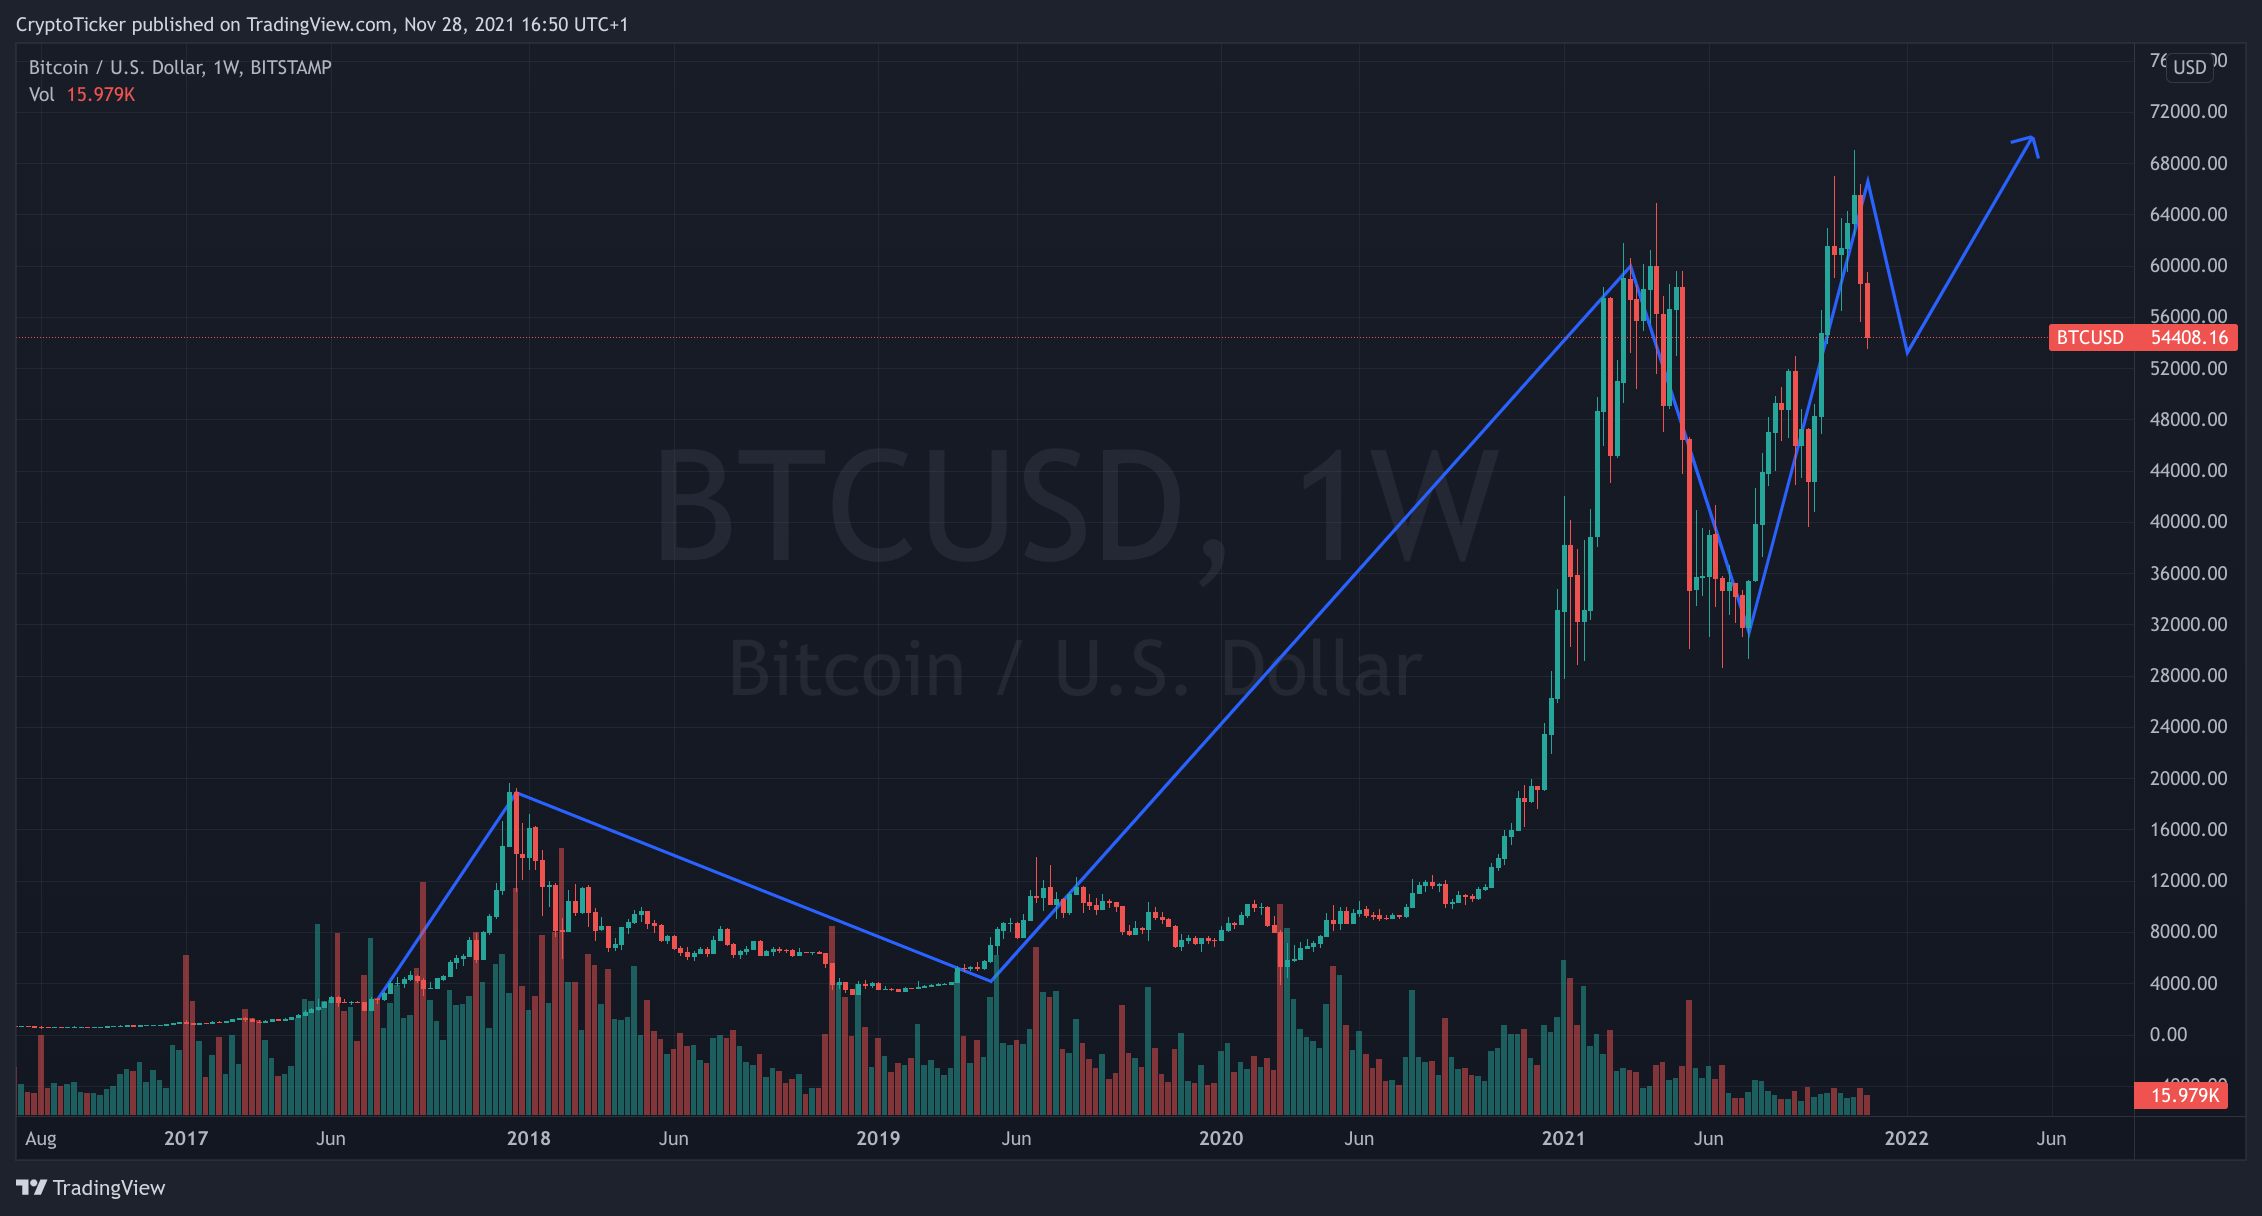 BTC/USD 1-week chart showing Bitcoin's rise over the years